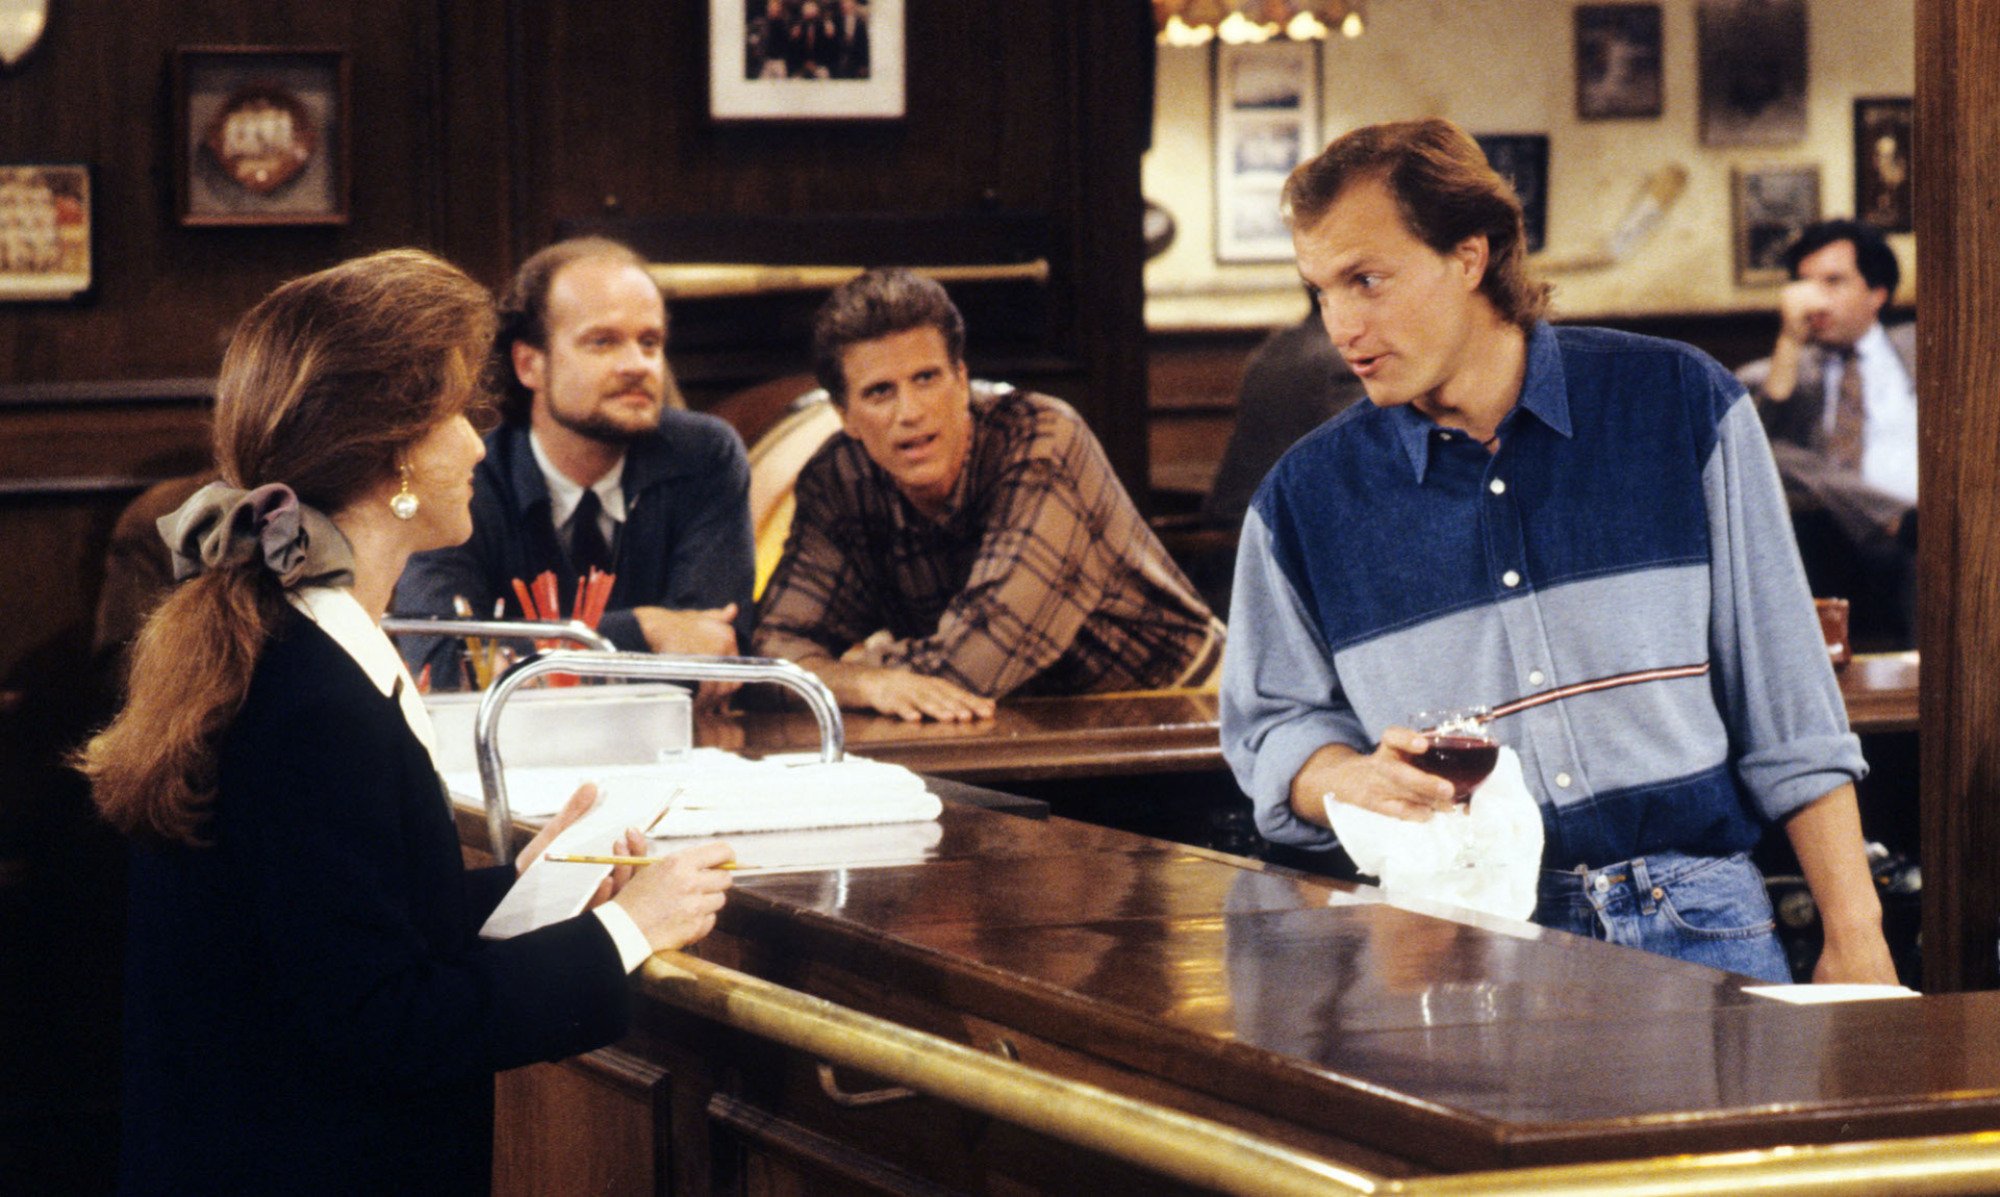 Shelley Long, Kelsey Grammer, Ted Danson, and Woody Harrelson in "Cheers"